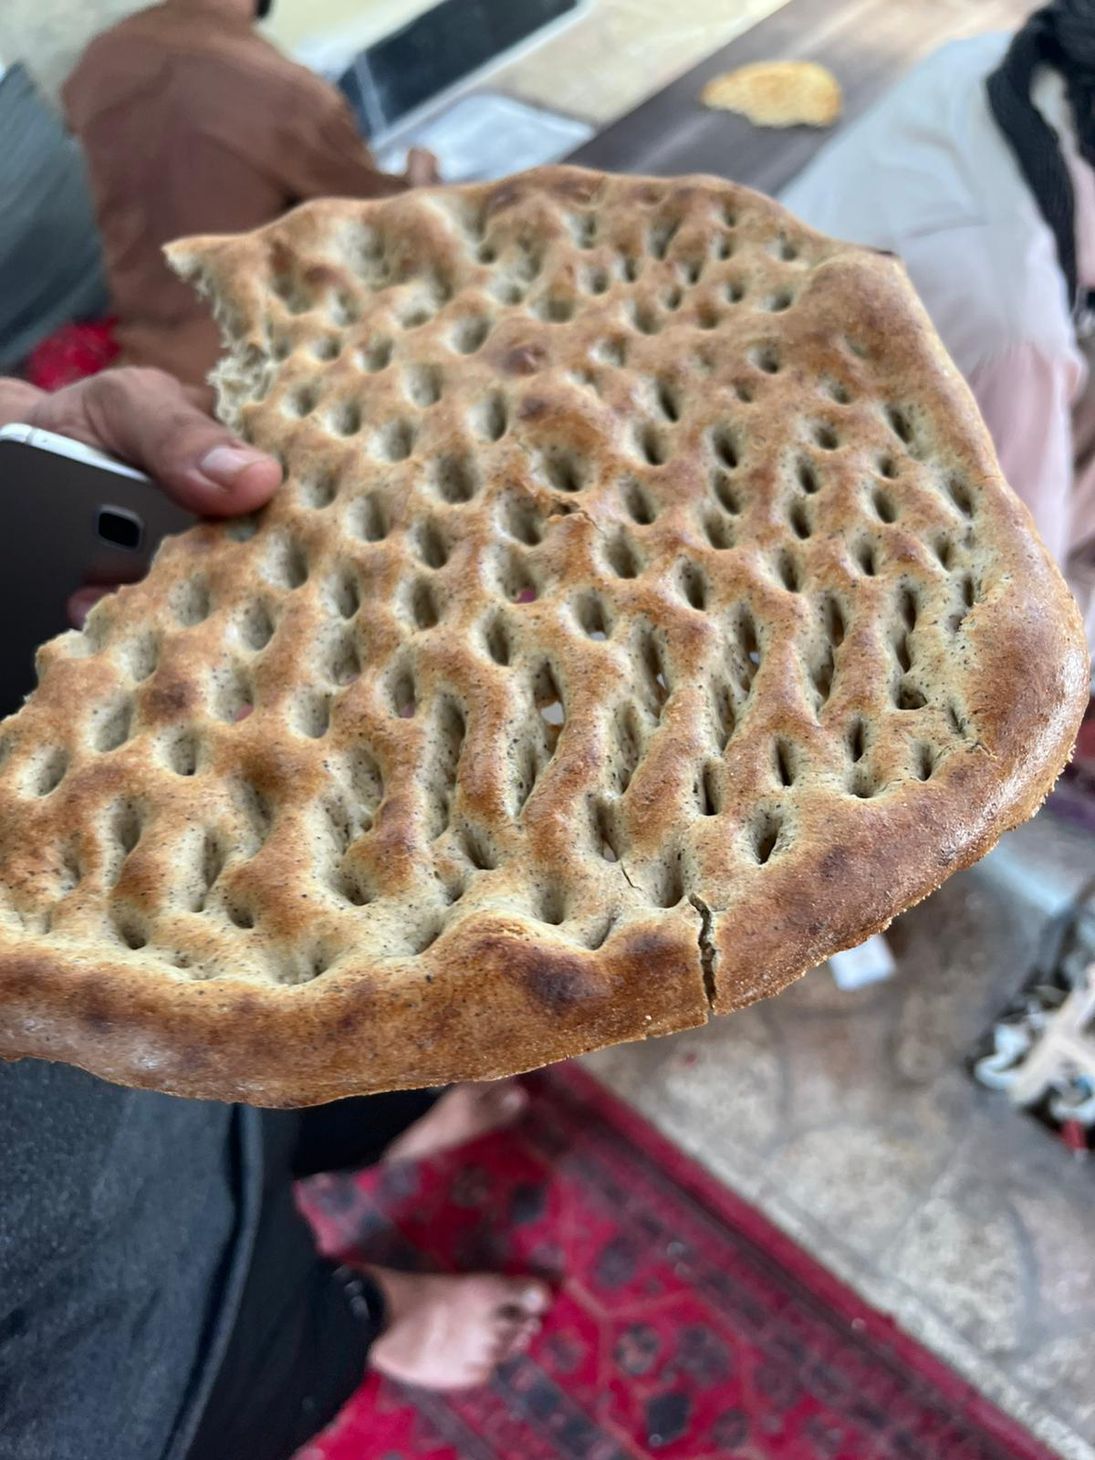 Baked brown flat bread with many holes throughout similar to Naan bread.